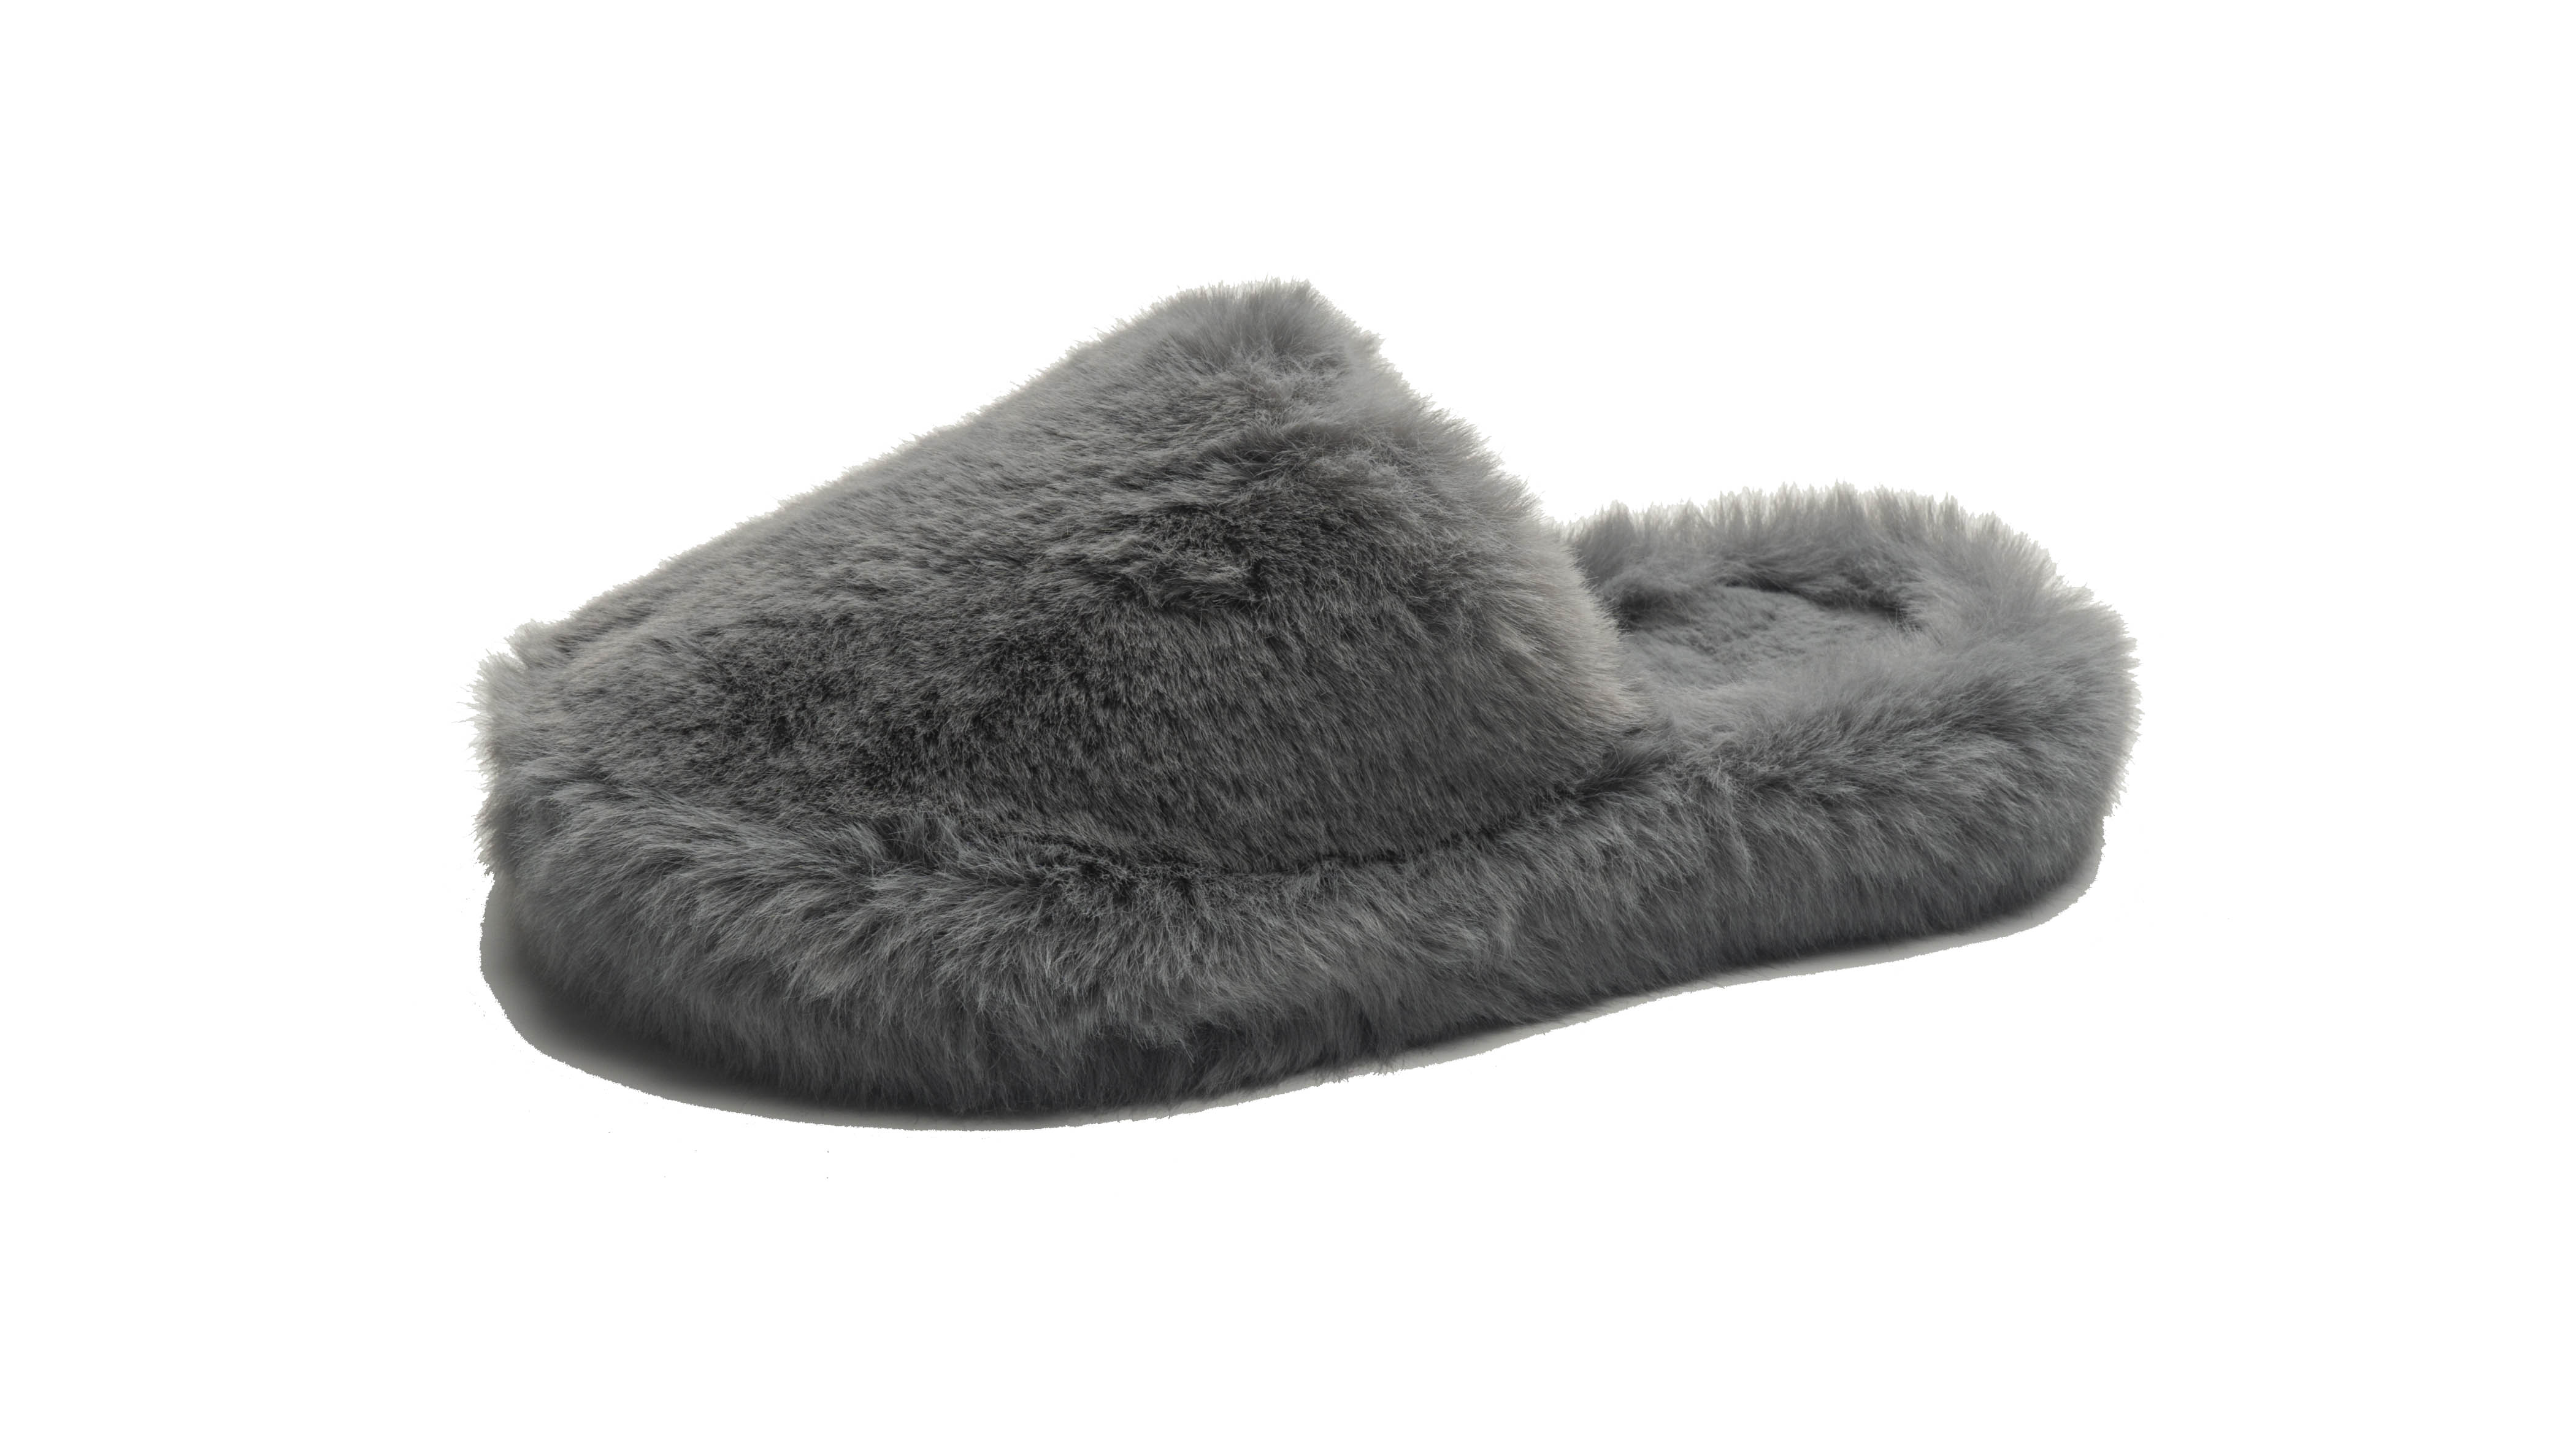 Plush Warm Home Lightweight Soft Comfortable Winter Shoes Women's fur Slippers Manufacturer Indoor Plush Slippers